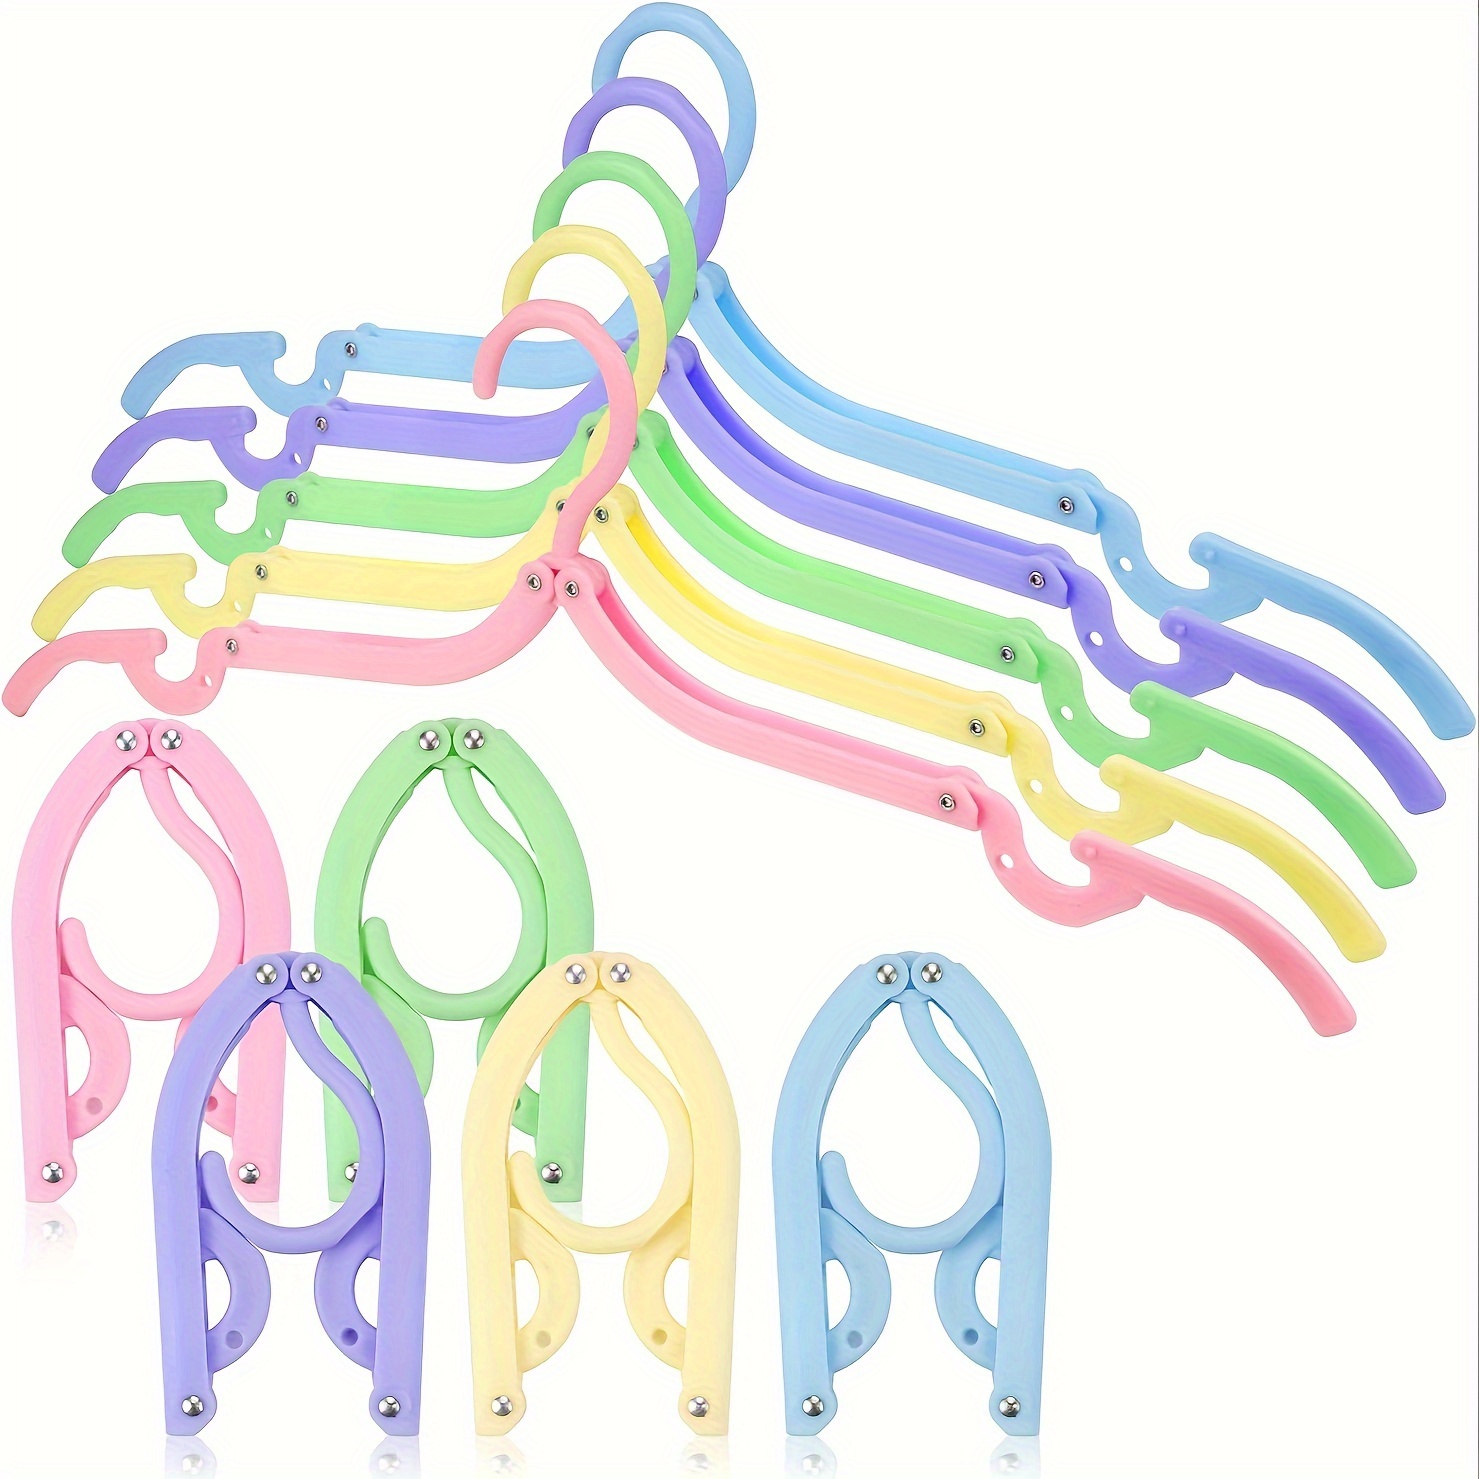 

10pcs, Travel Hangers - Cruise Ship Essentials Portable Folding Clothes Hangers Travel Accessories Foldable Clothes Drying Rack For Travel (colorful)